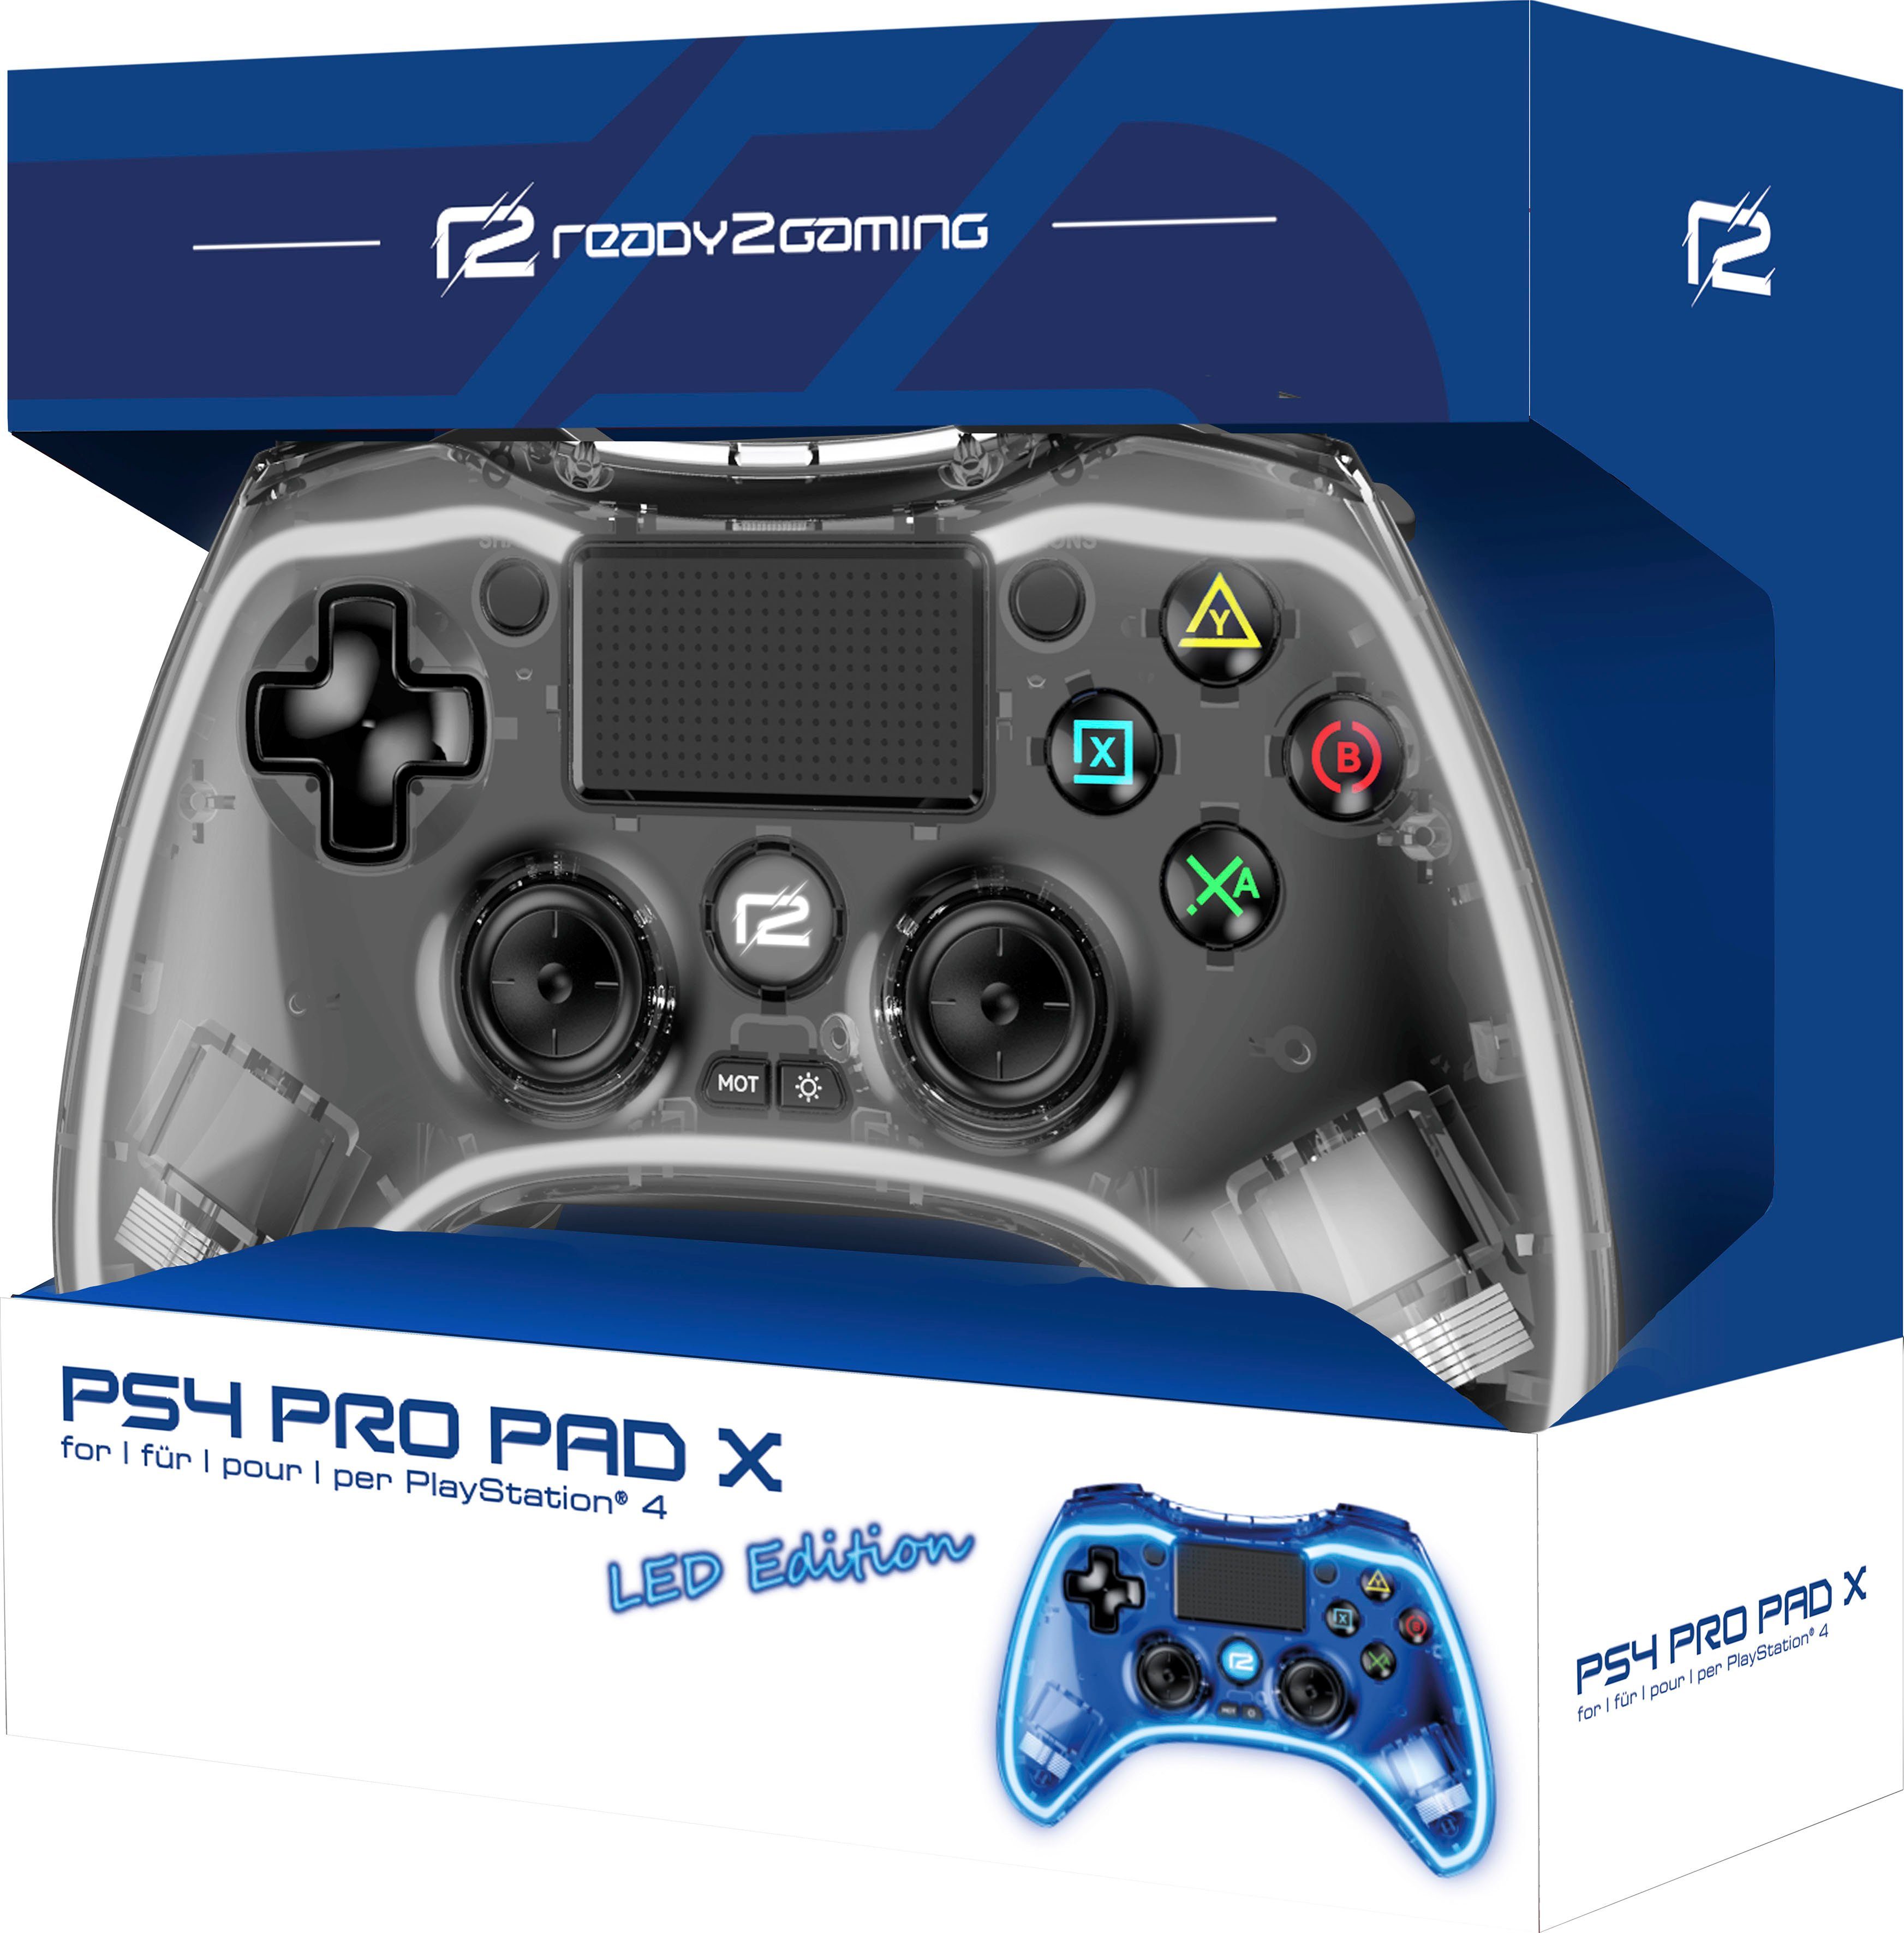 Controller Edition transparent Beleuchtung blauer PS4 mit Led LED Pad X Ready2gaming Pro